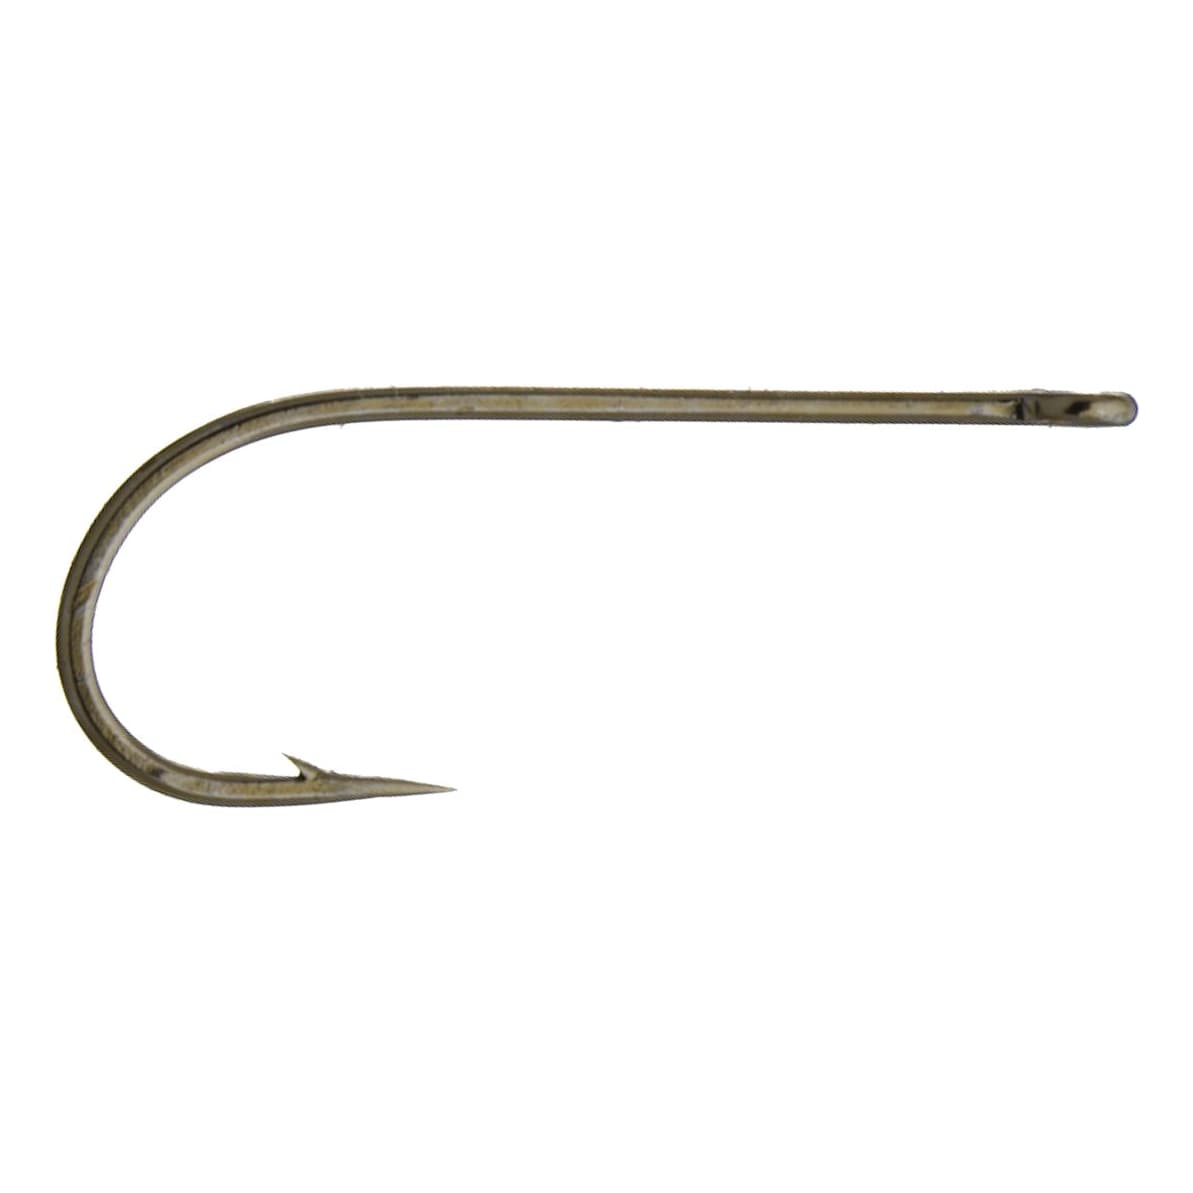 White River Fly Shop® Straight Eye Dry Fly Hook